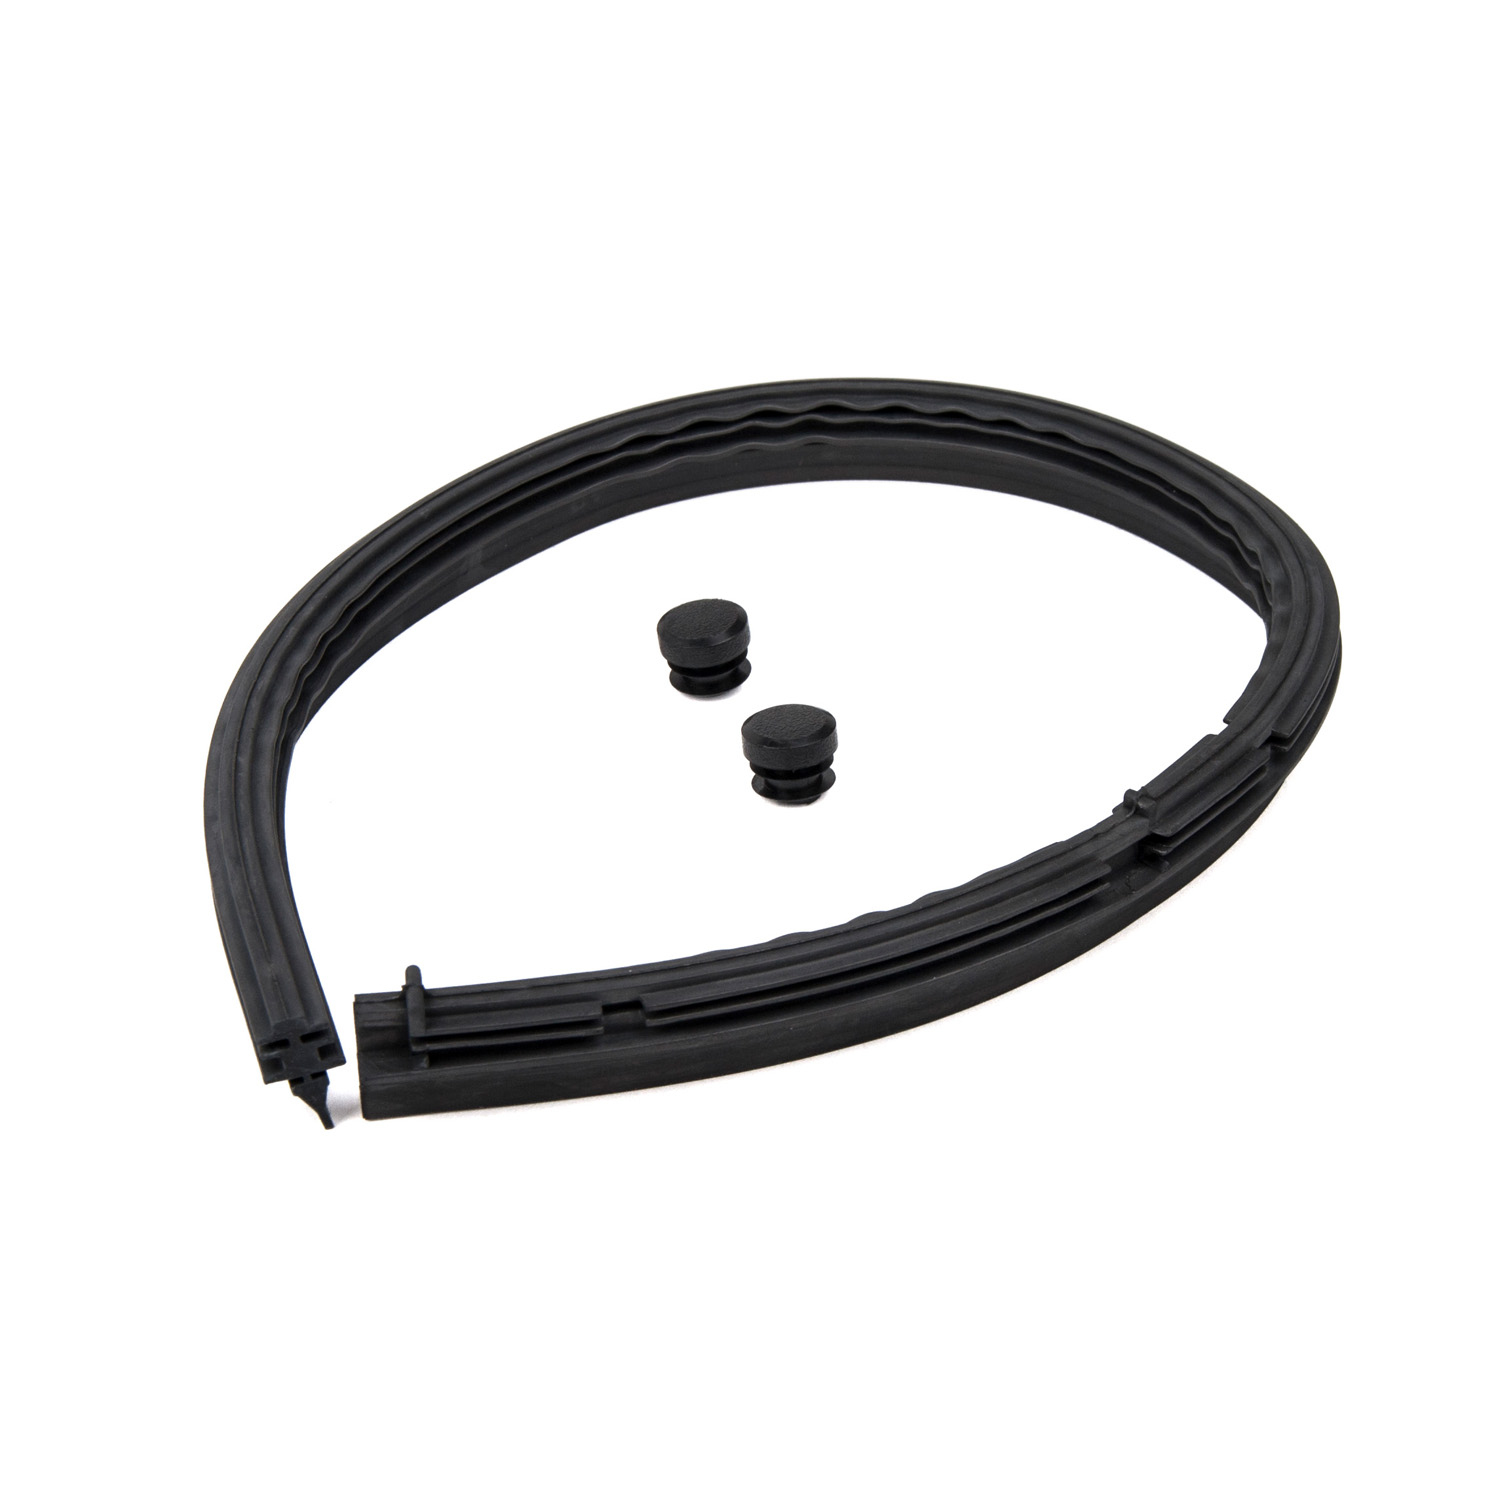 425-039-A Wiper rubber length 50 cm, with end caps